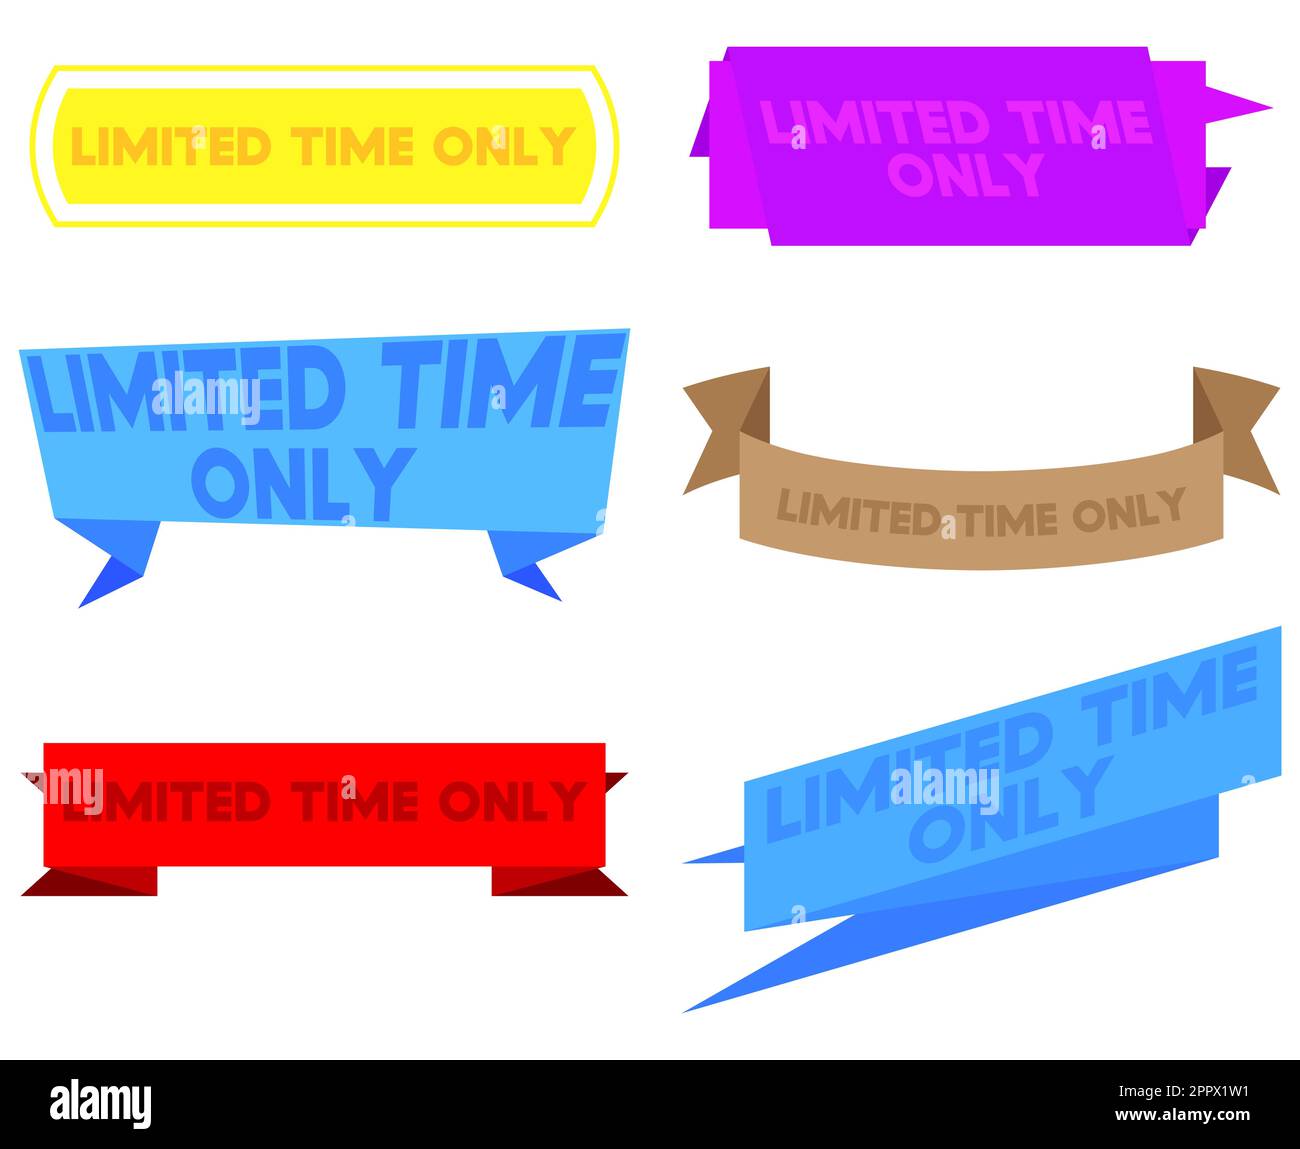 https://c8.alamy.com/comp/2PPX1W1/set-of-ribbon-with-limited-time-only-text-2PPX1W1.jpg